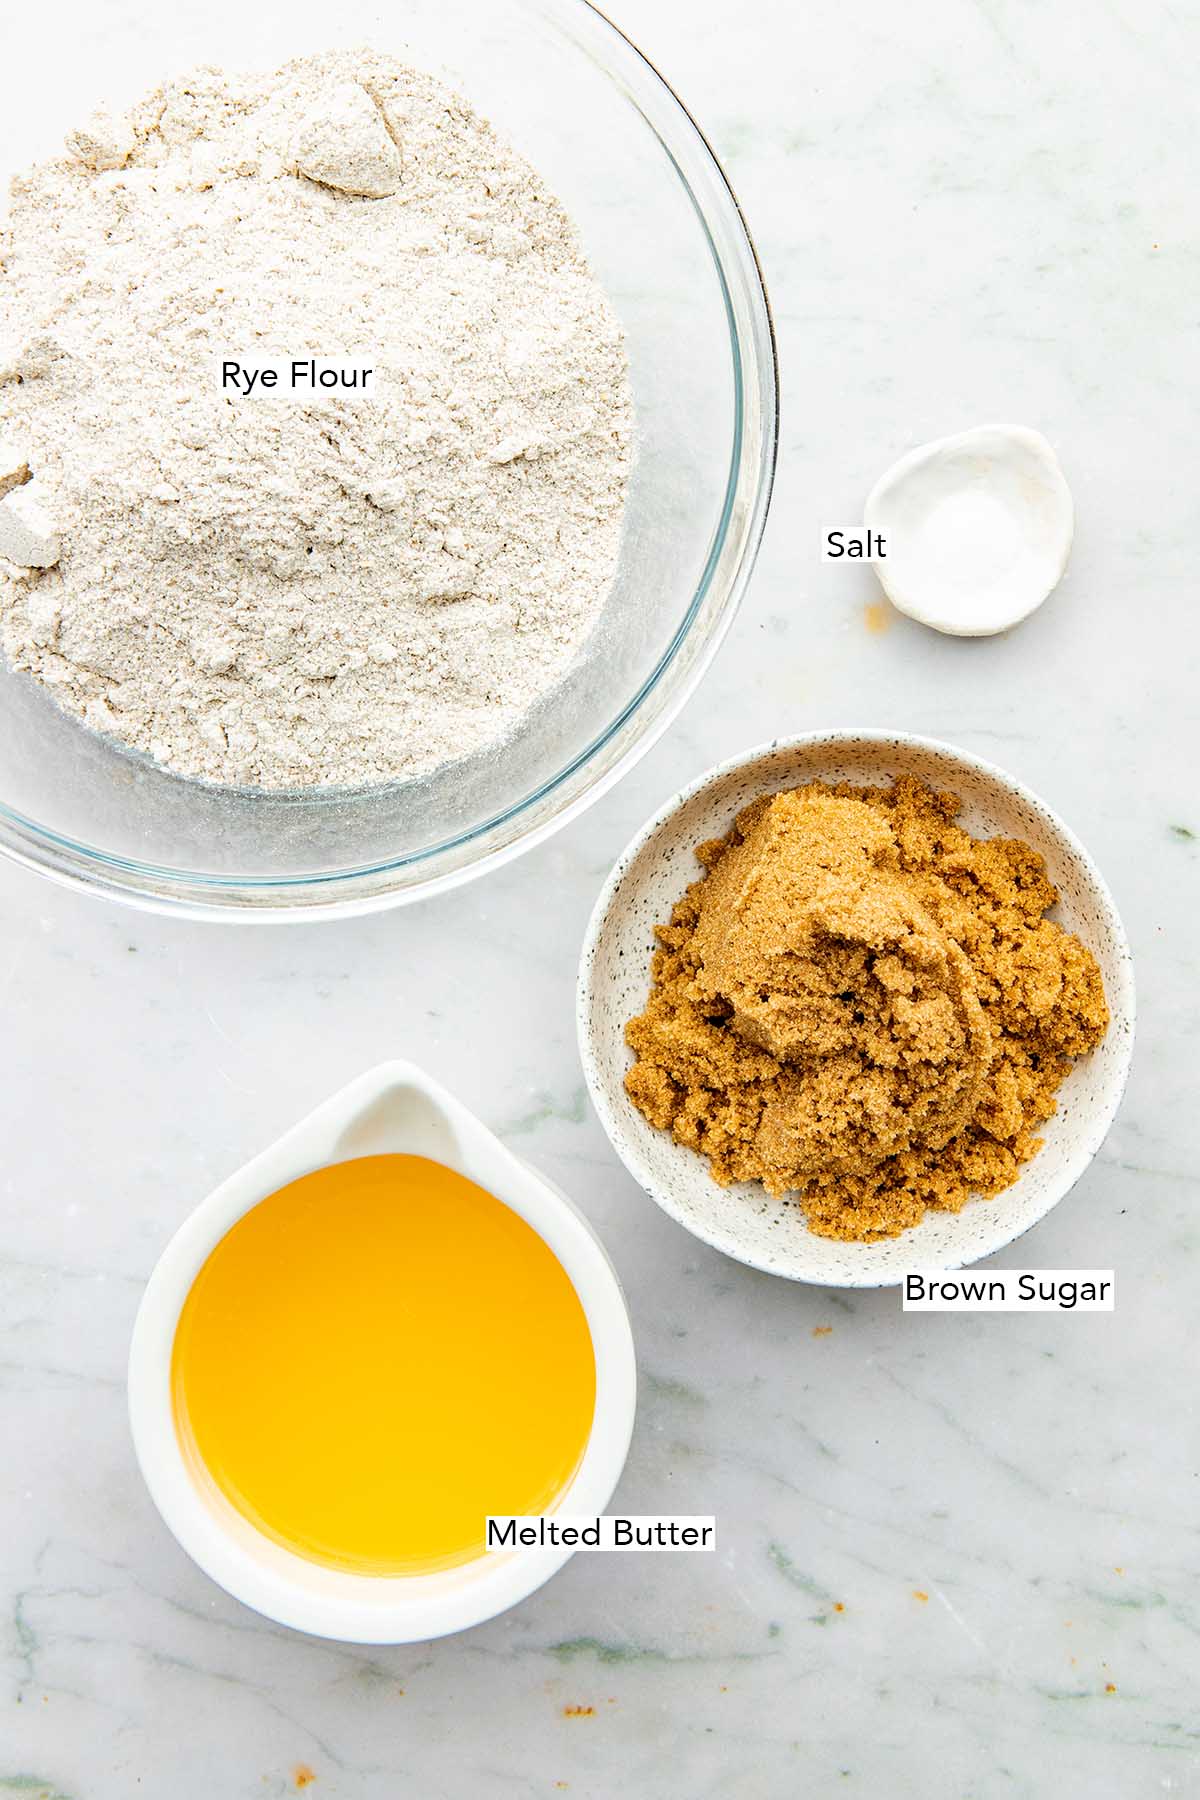 Ingredients to make the rye flour topping for this recipe.